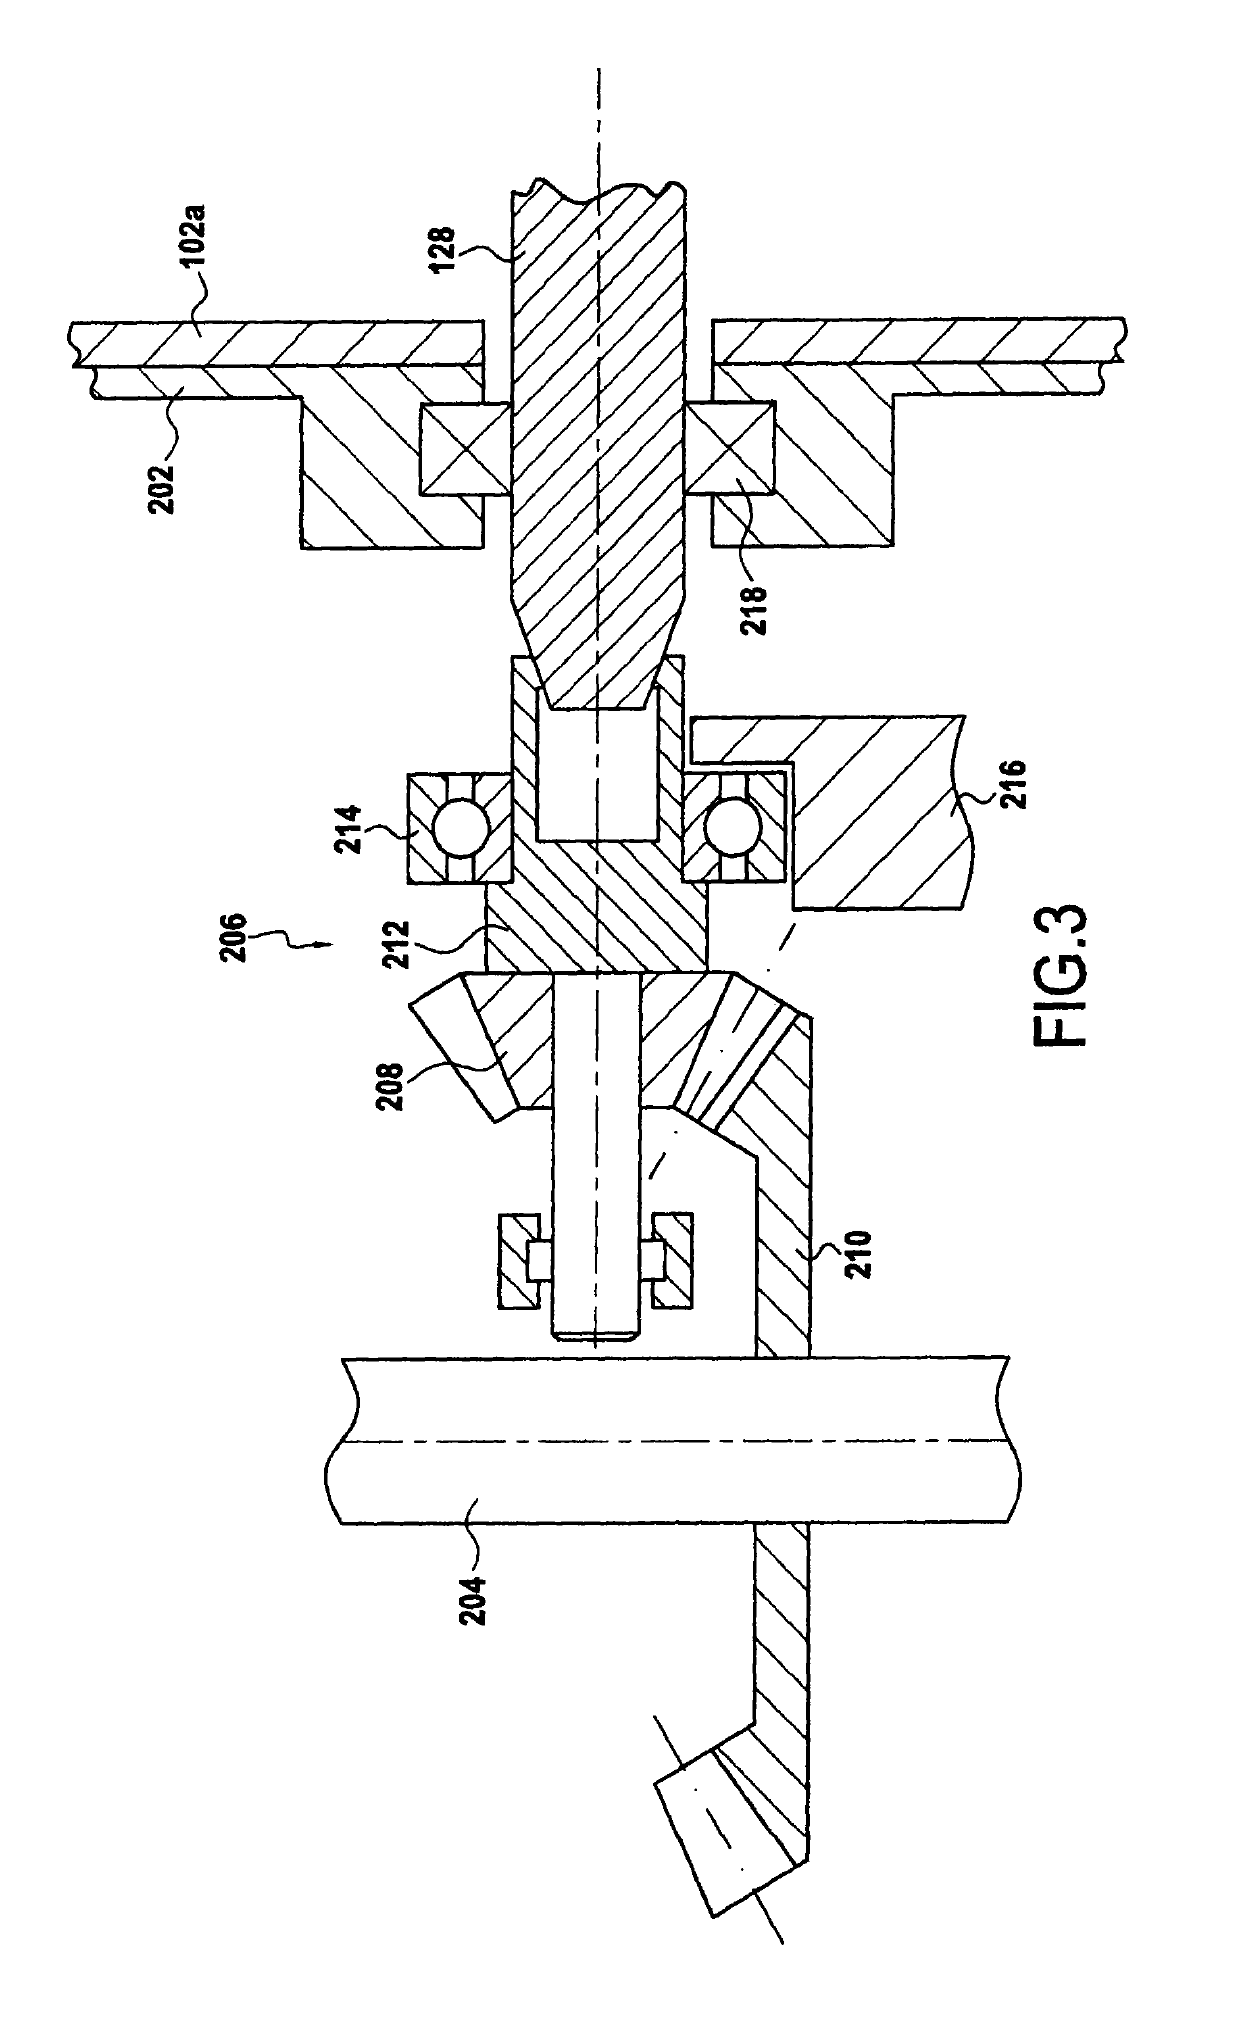 Non-lubricated architecture for a turboshaft engine